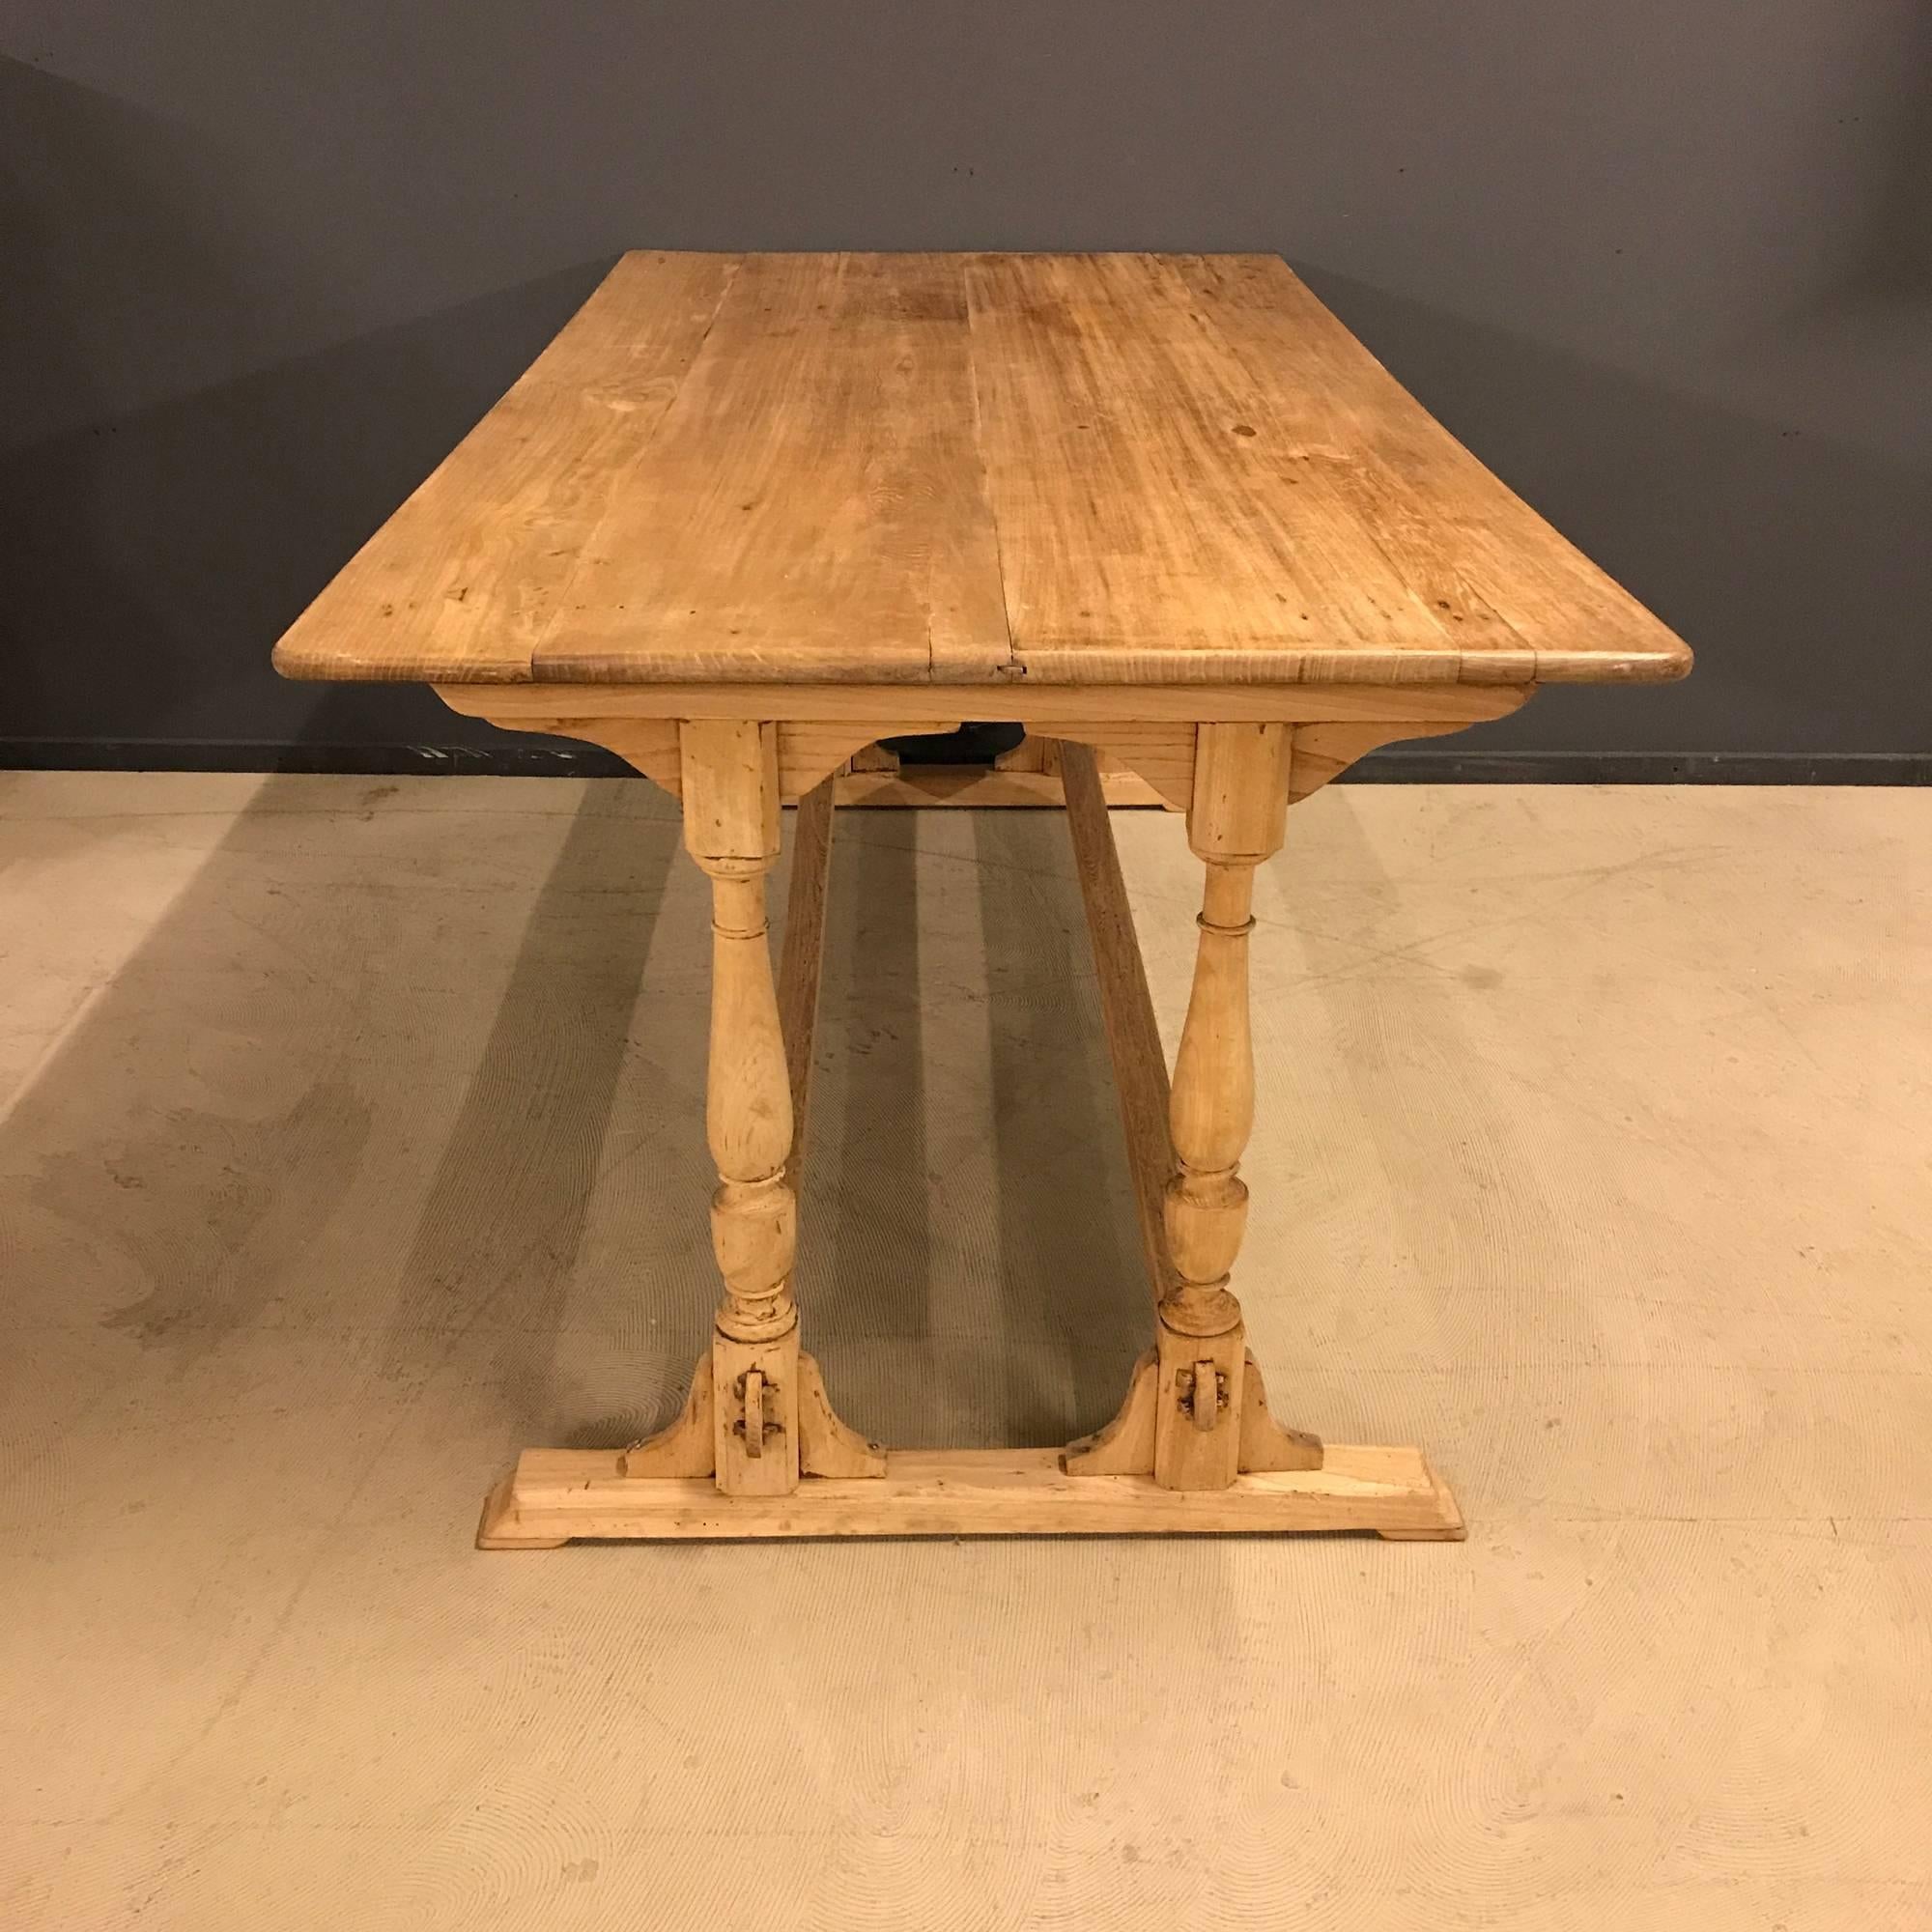 French antique bleeched oak farmhouse table. Remains in good condition.
 
Size of this French antique bleeched oak farmhouse table
180 x 93 x 79 Cm.